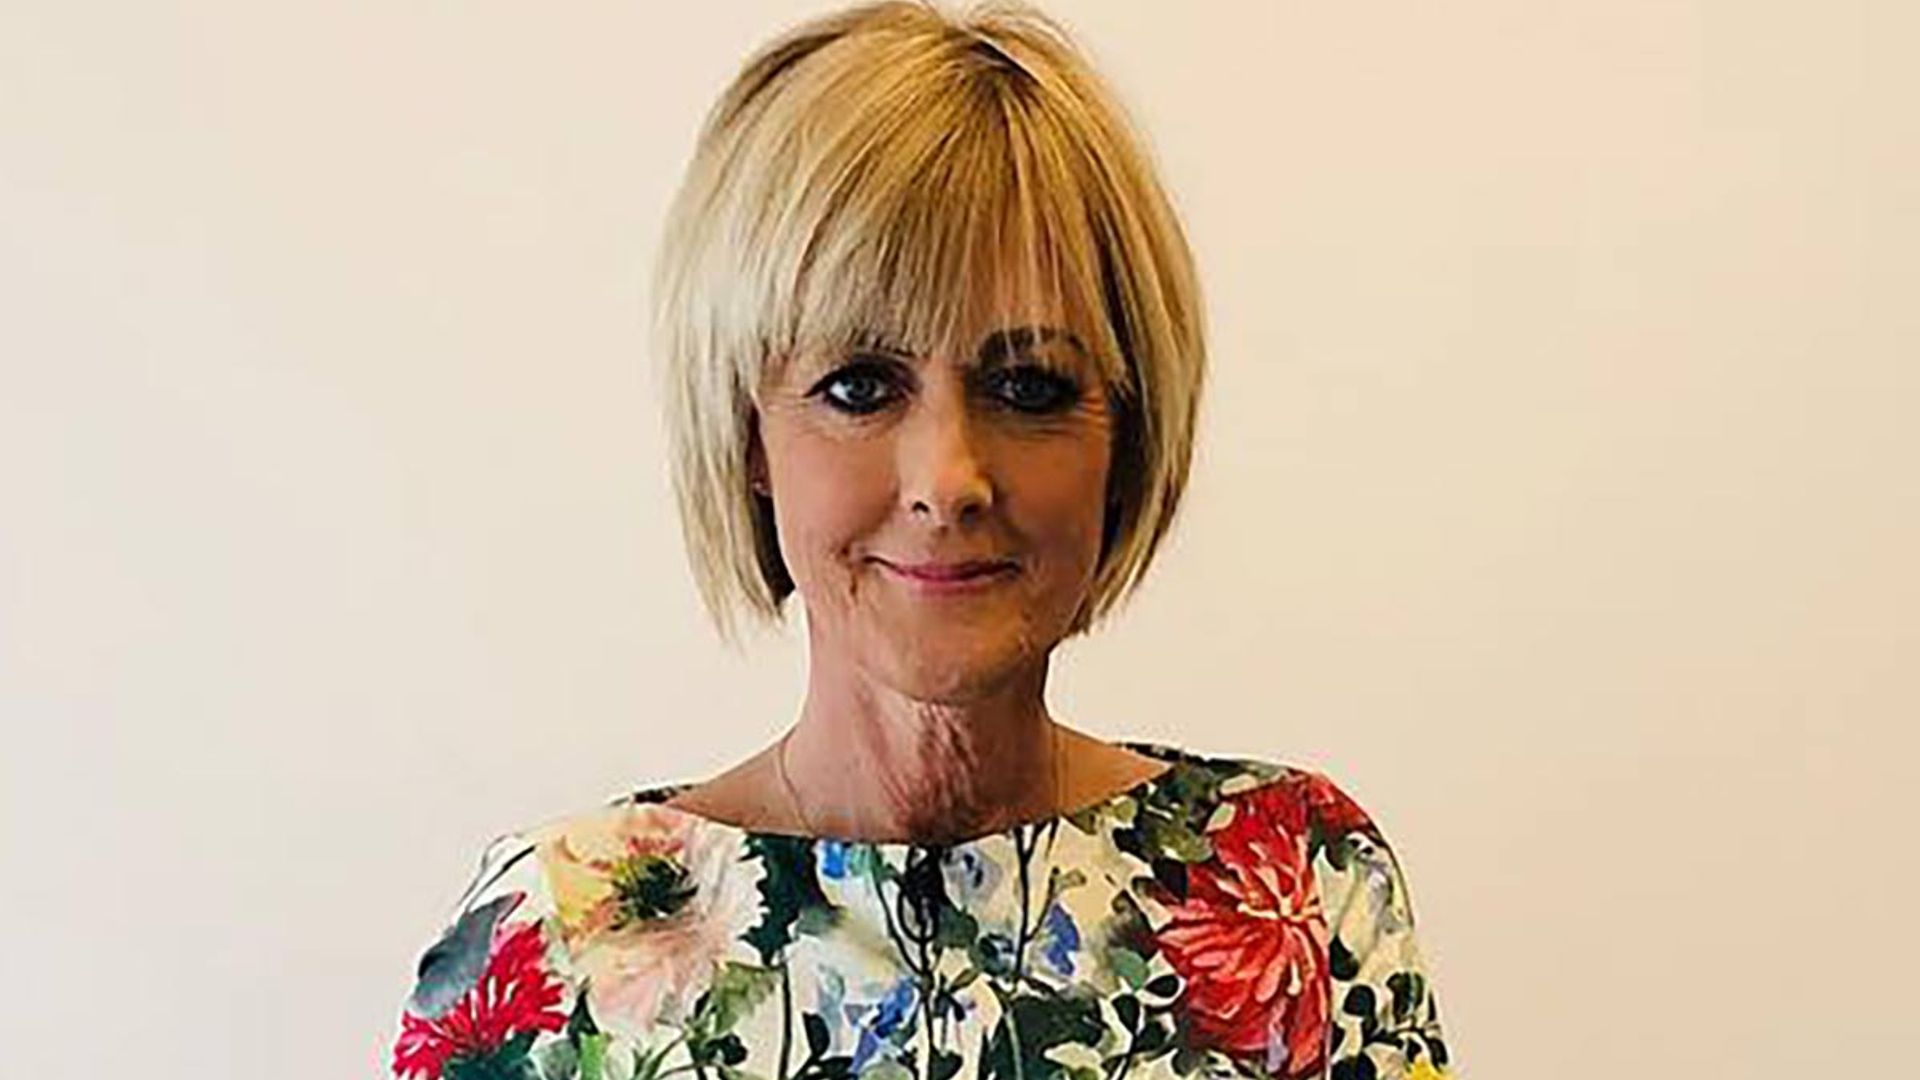 Jane Moore's lemon print dress is giving us serious summer vibes – and you won't believe her shoes